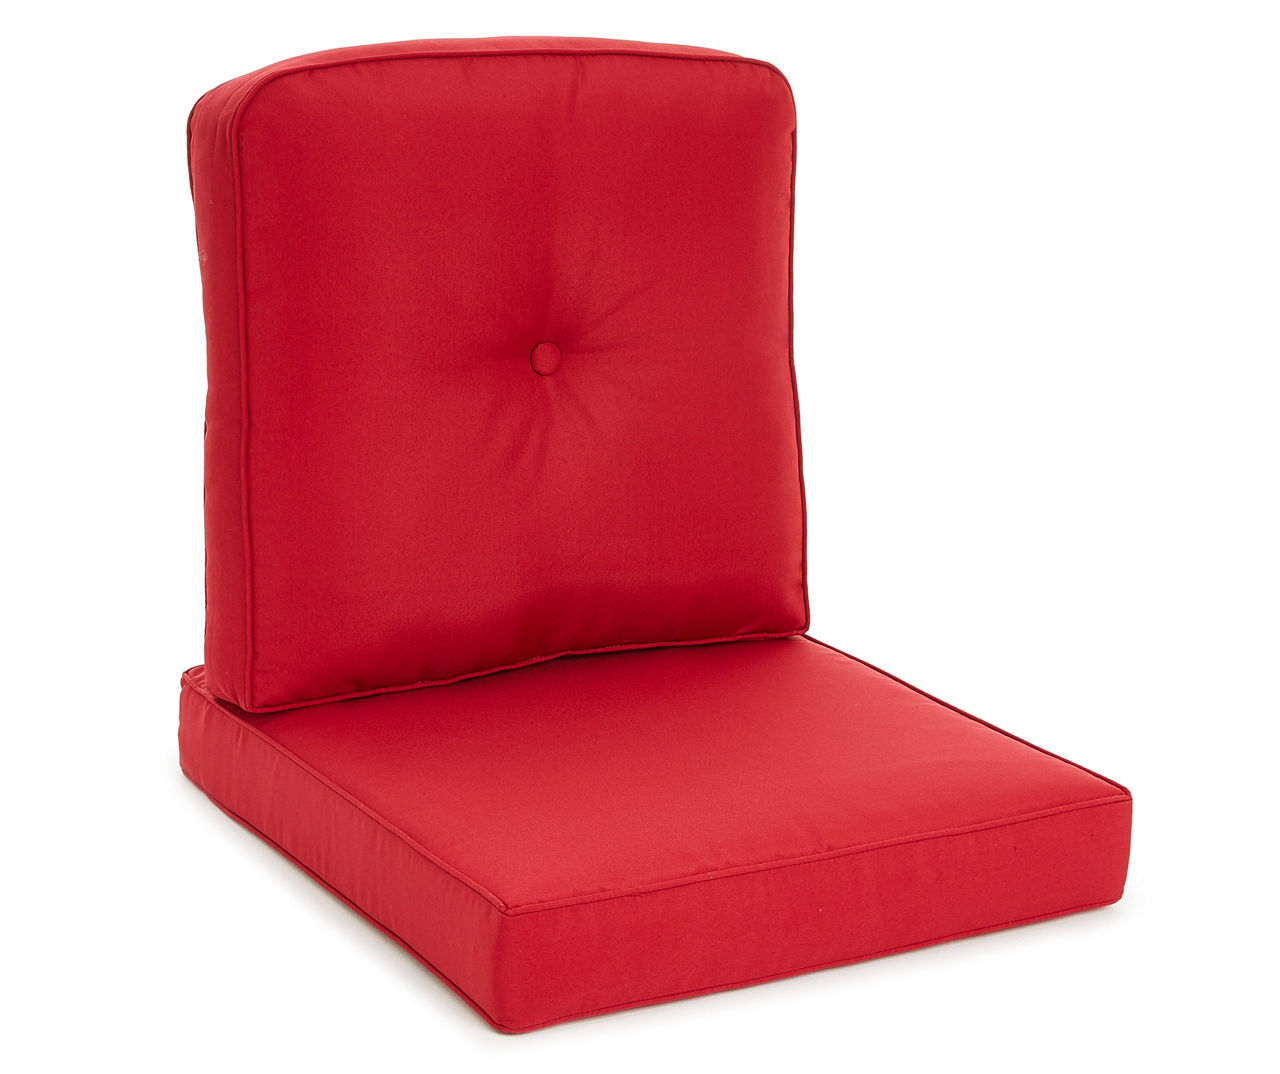 RED 4 PC REPLACEMENT CUSHION SET